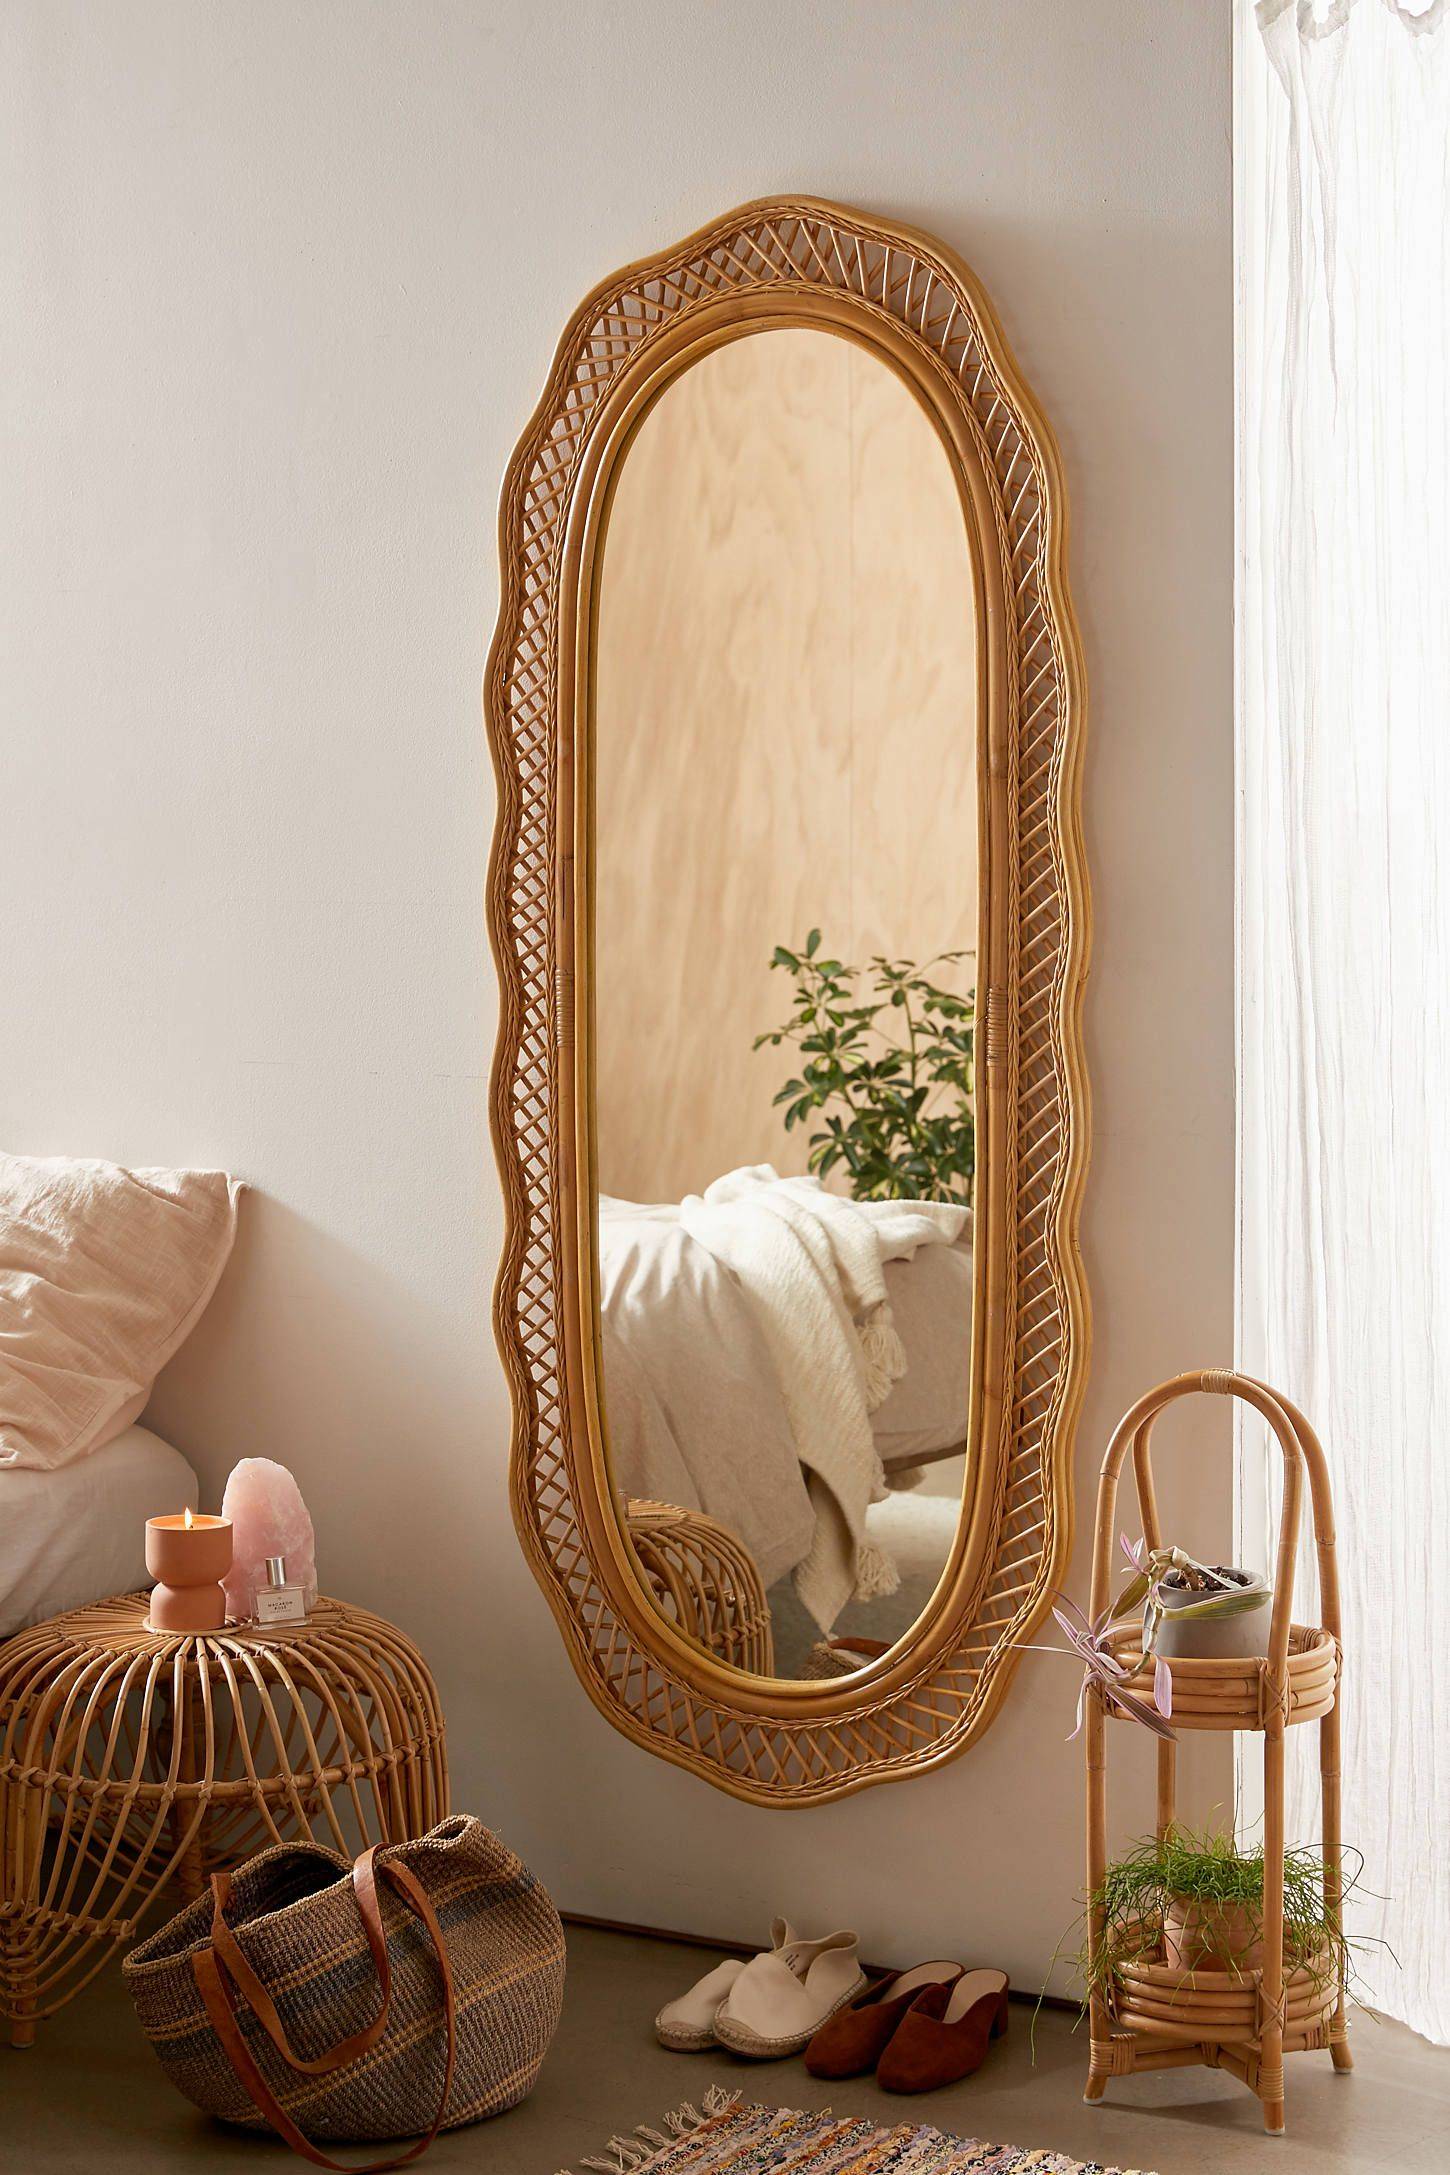 Malorie Wicker Wall Mirror from Urban Outfitters